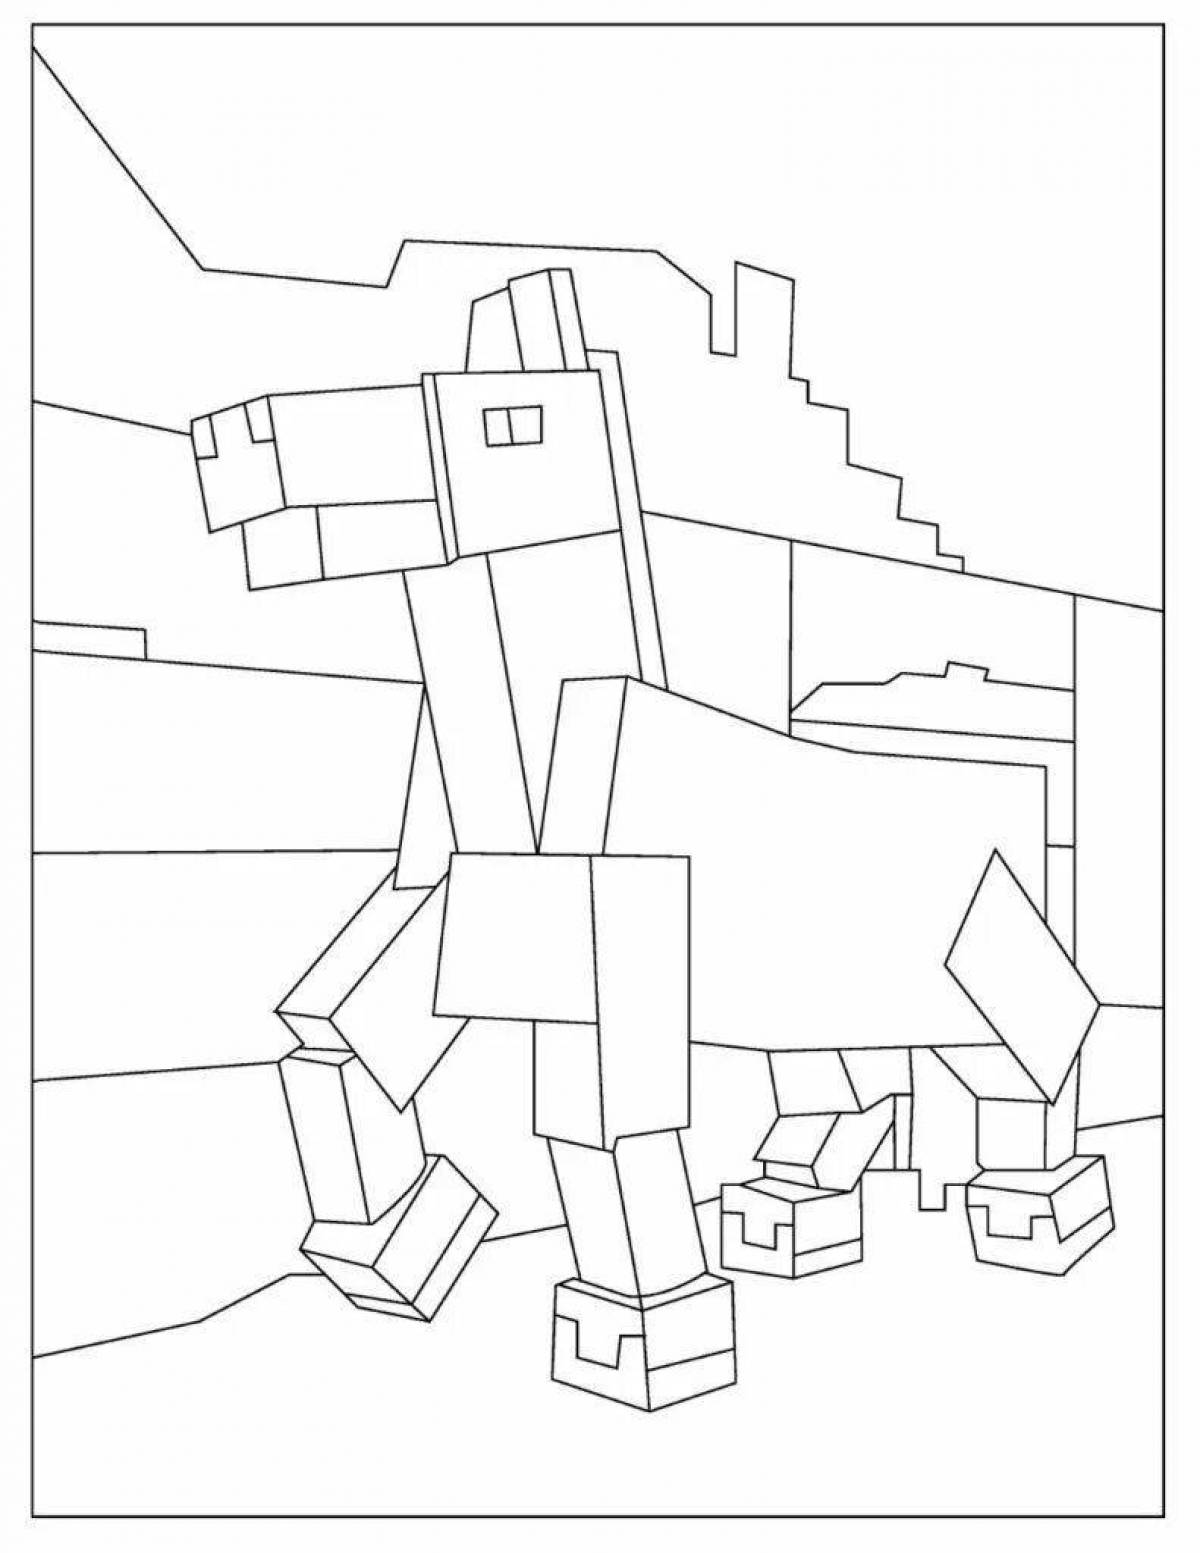 Tempting minecraft dungeon coloring page